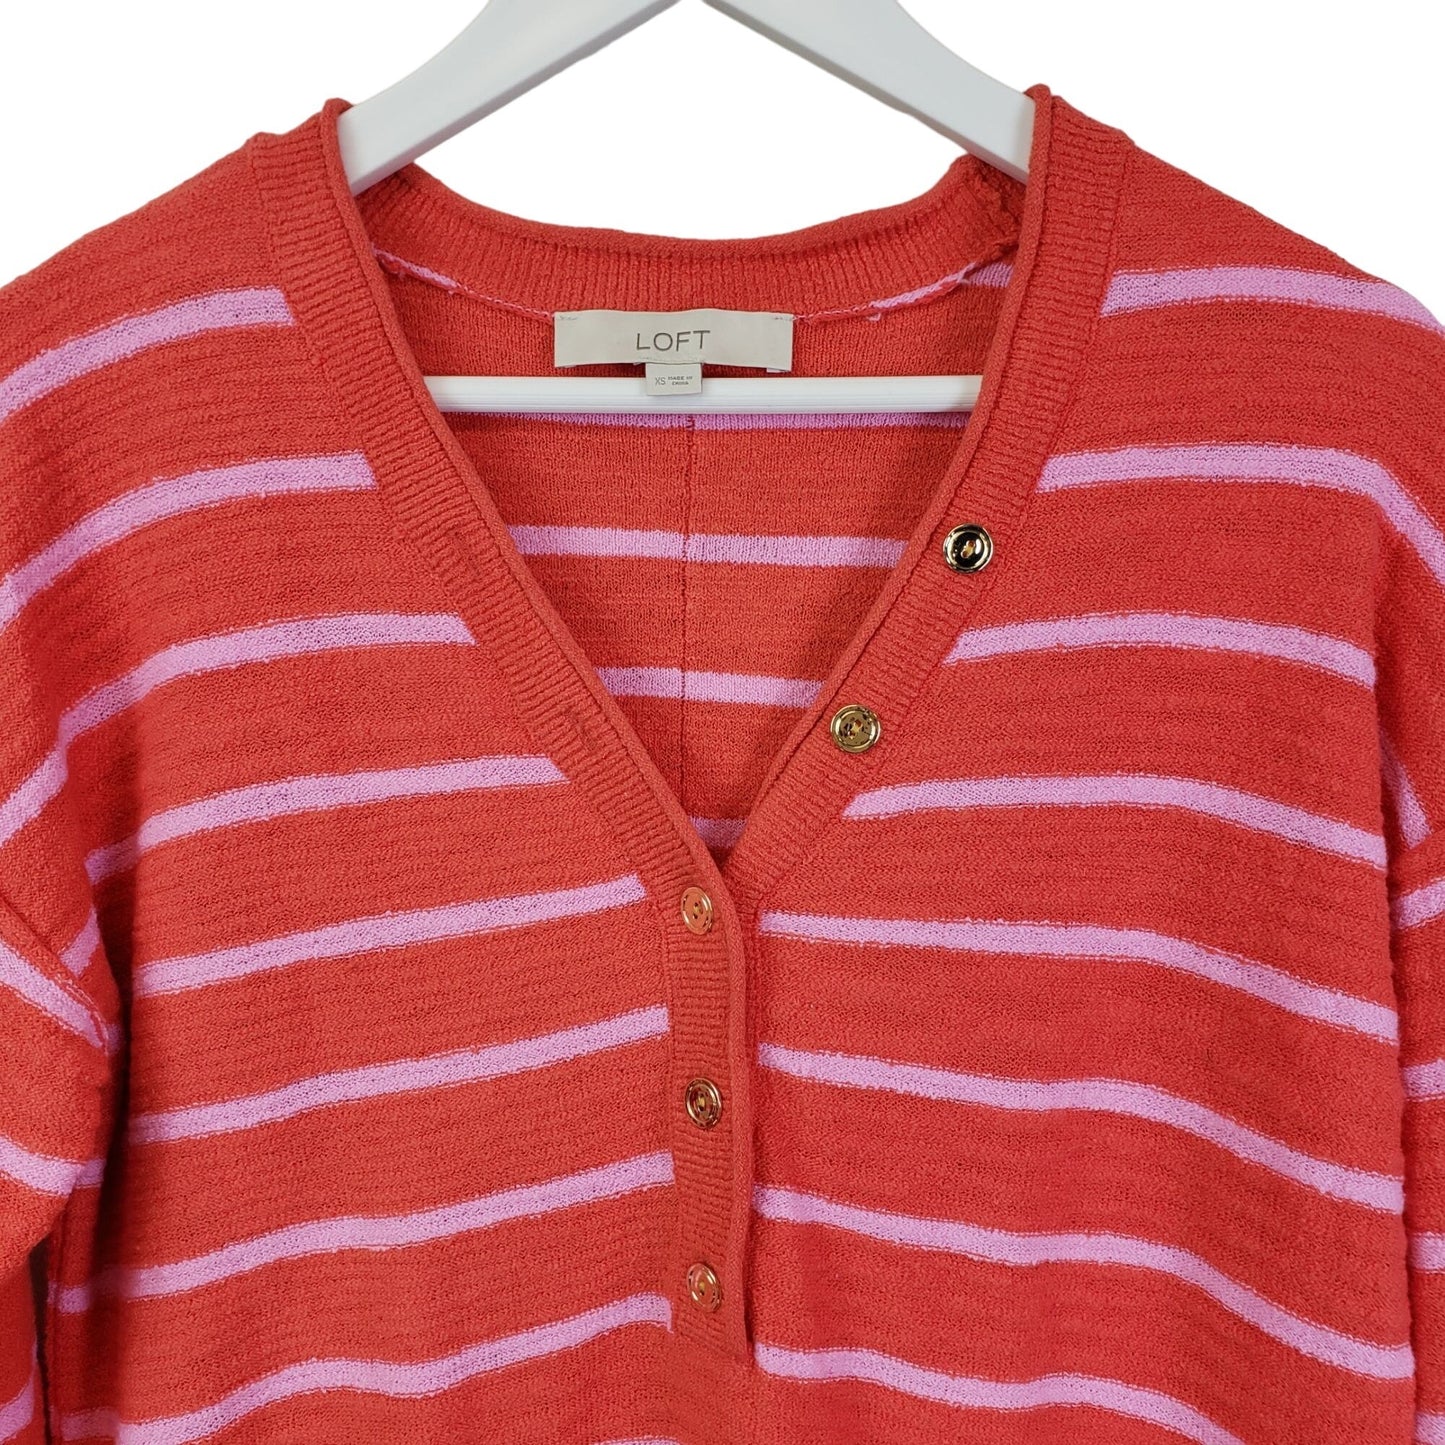 Loft Marled Texture Striped V-Neck Sweater Size XS/S